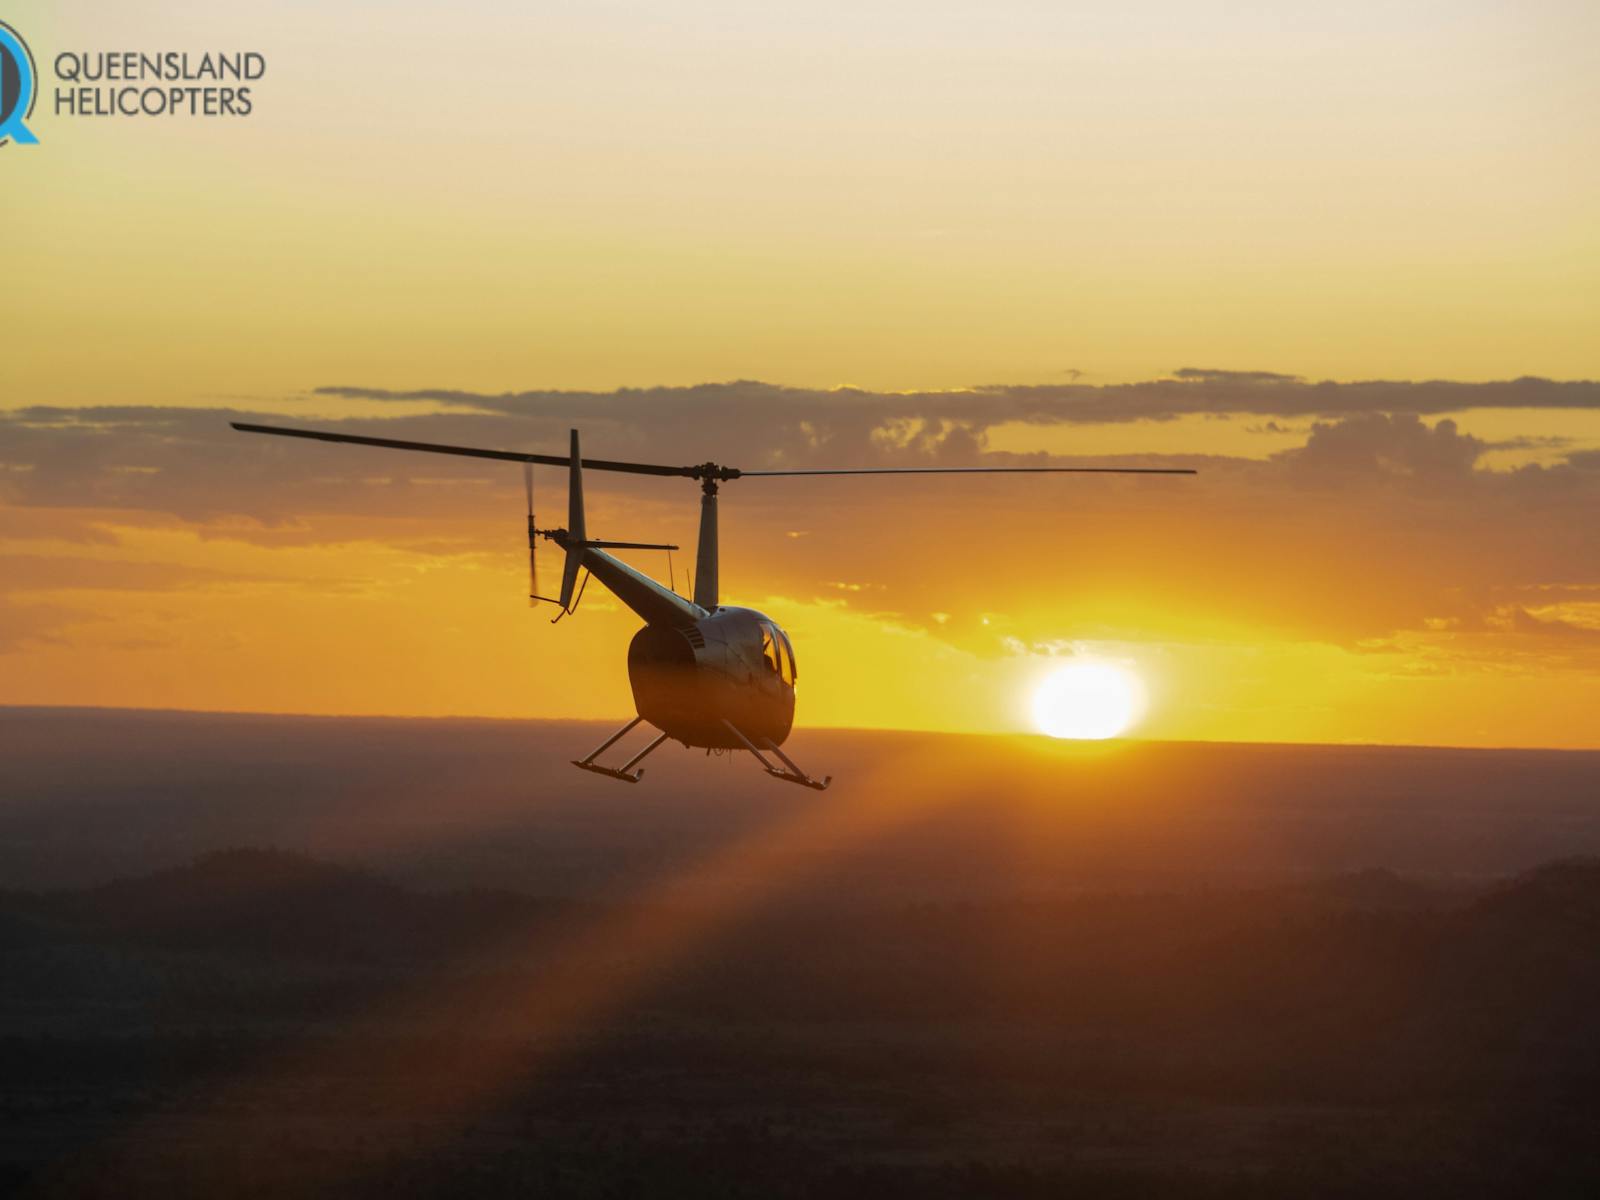 R44 Flying into sunset